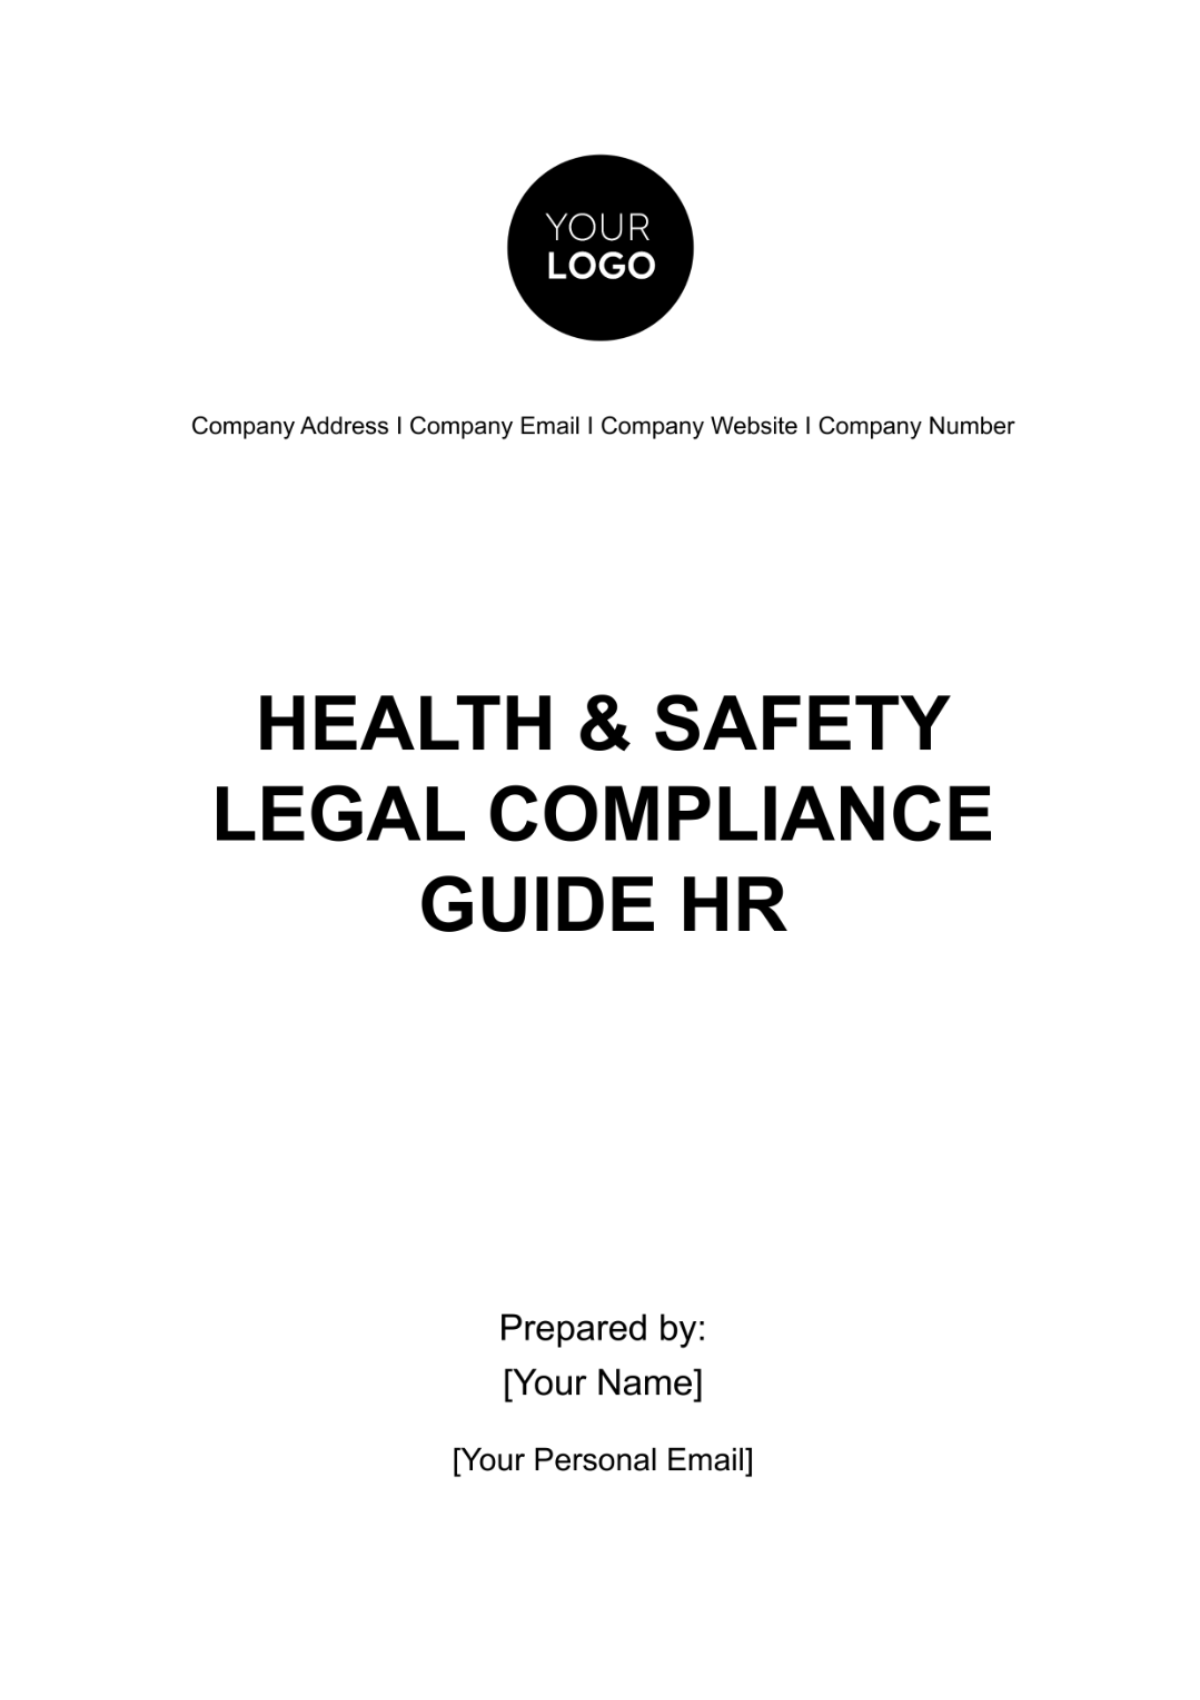 Health & Safety Legal Compliance Guide HR Template